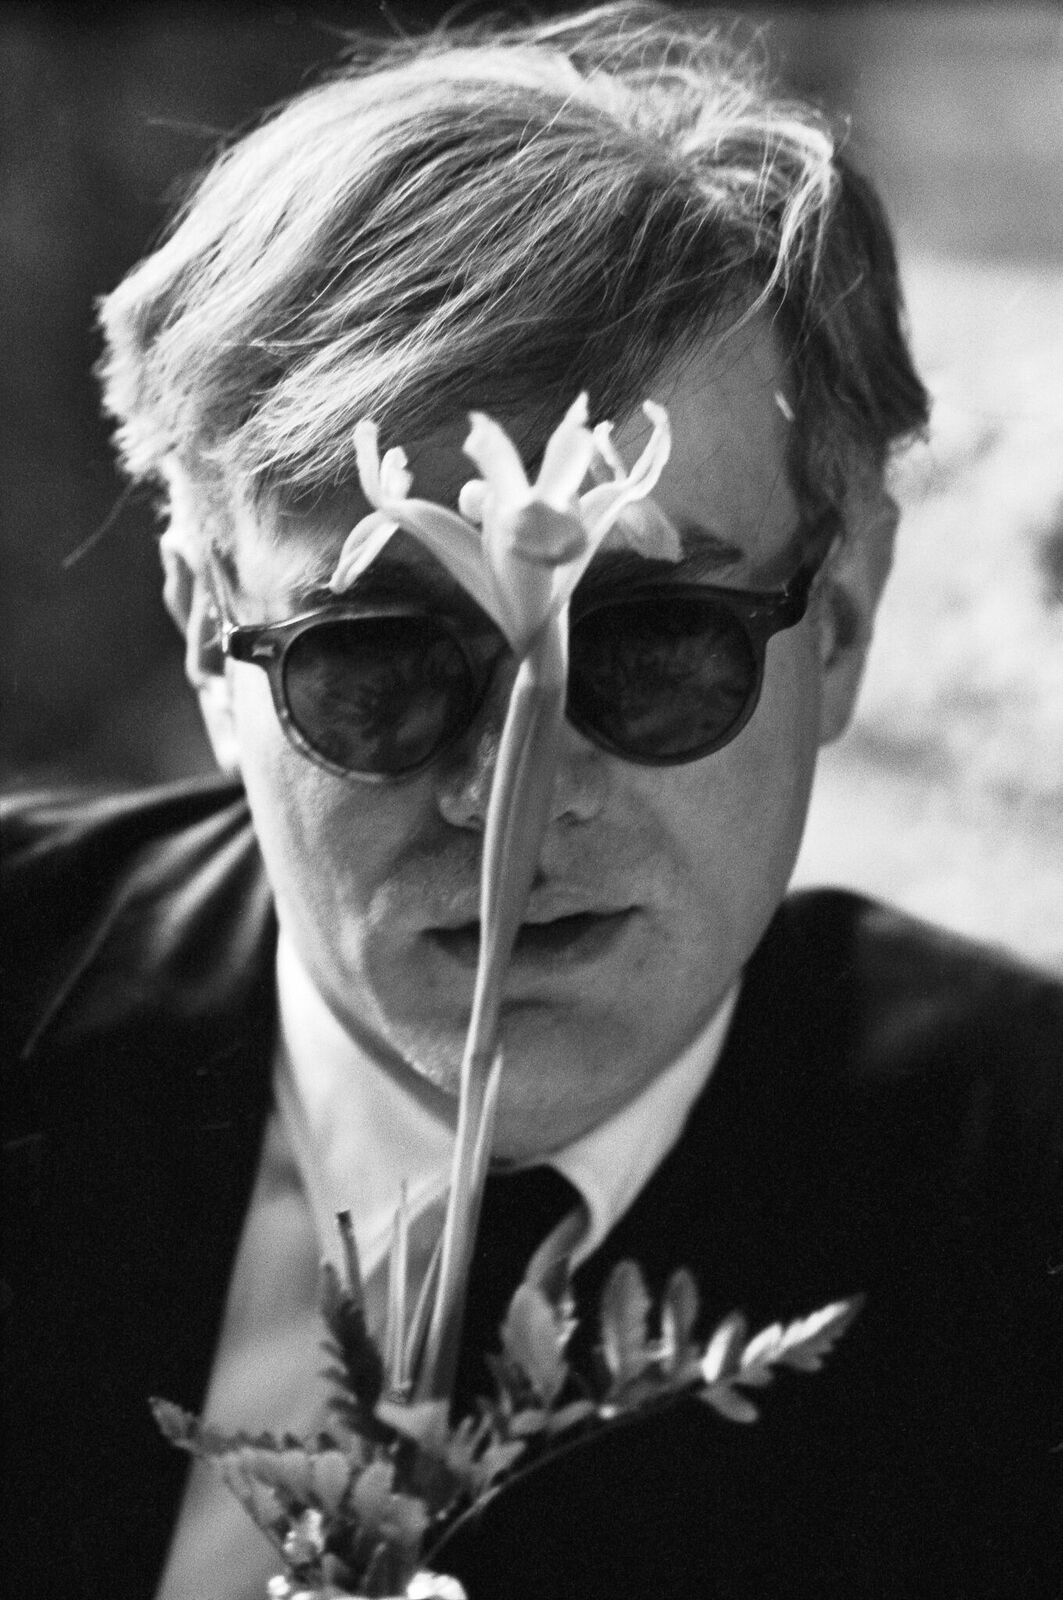 Dennis Hopper, Warhol with Flower, 1964, Iris print.The Andy Warhol Museum, Pittsburgh; Gift of Jay Reeg 2011.3.1 © Dennis Hopper, Courtesy of The Hopper Art Trust.